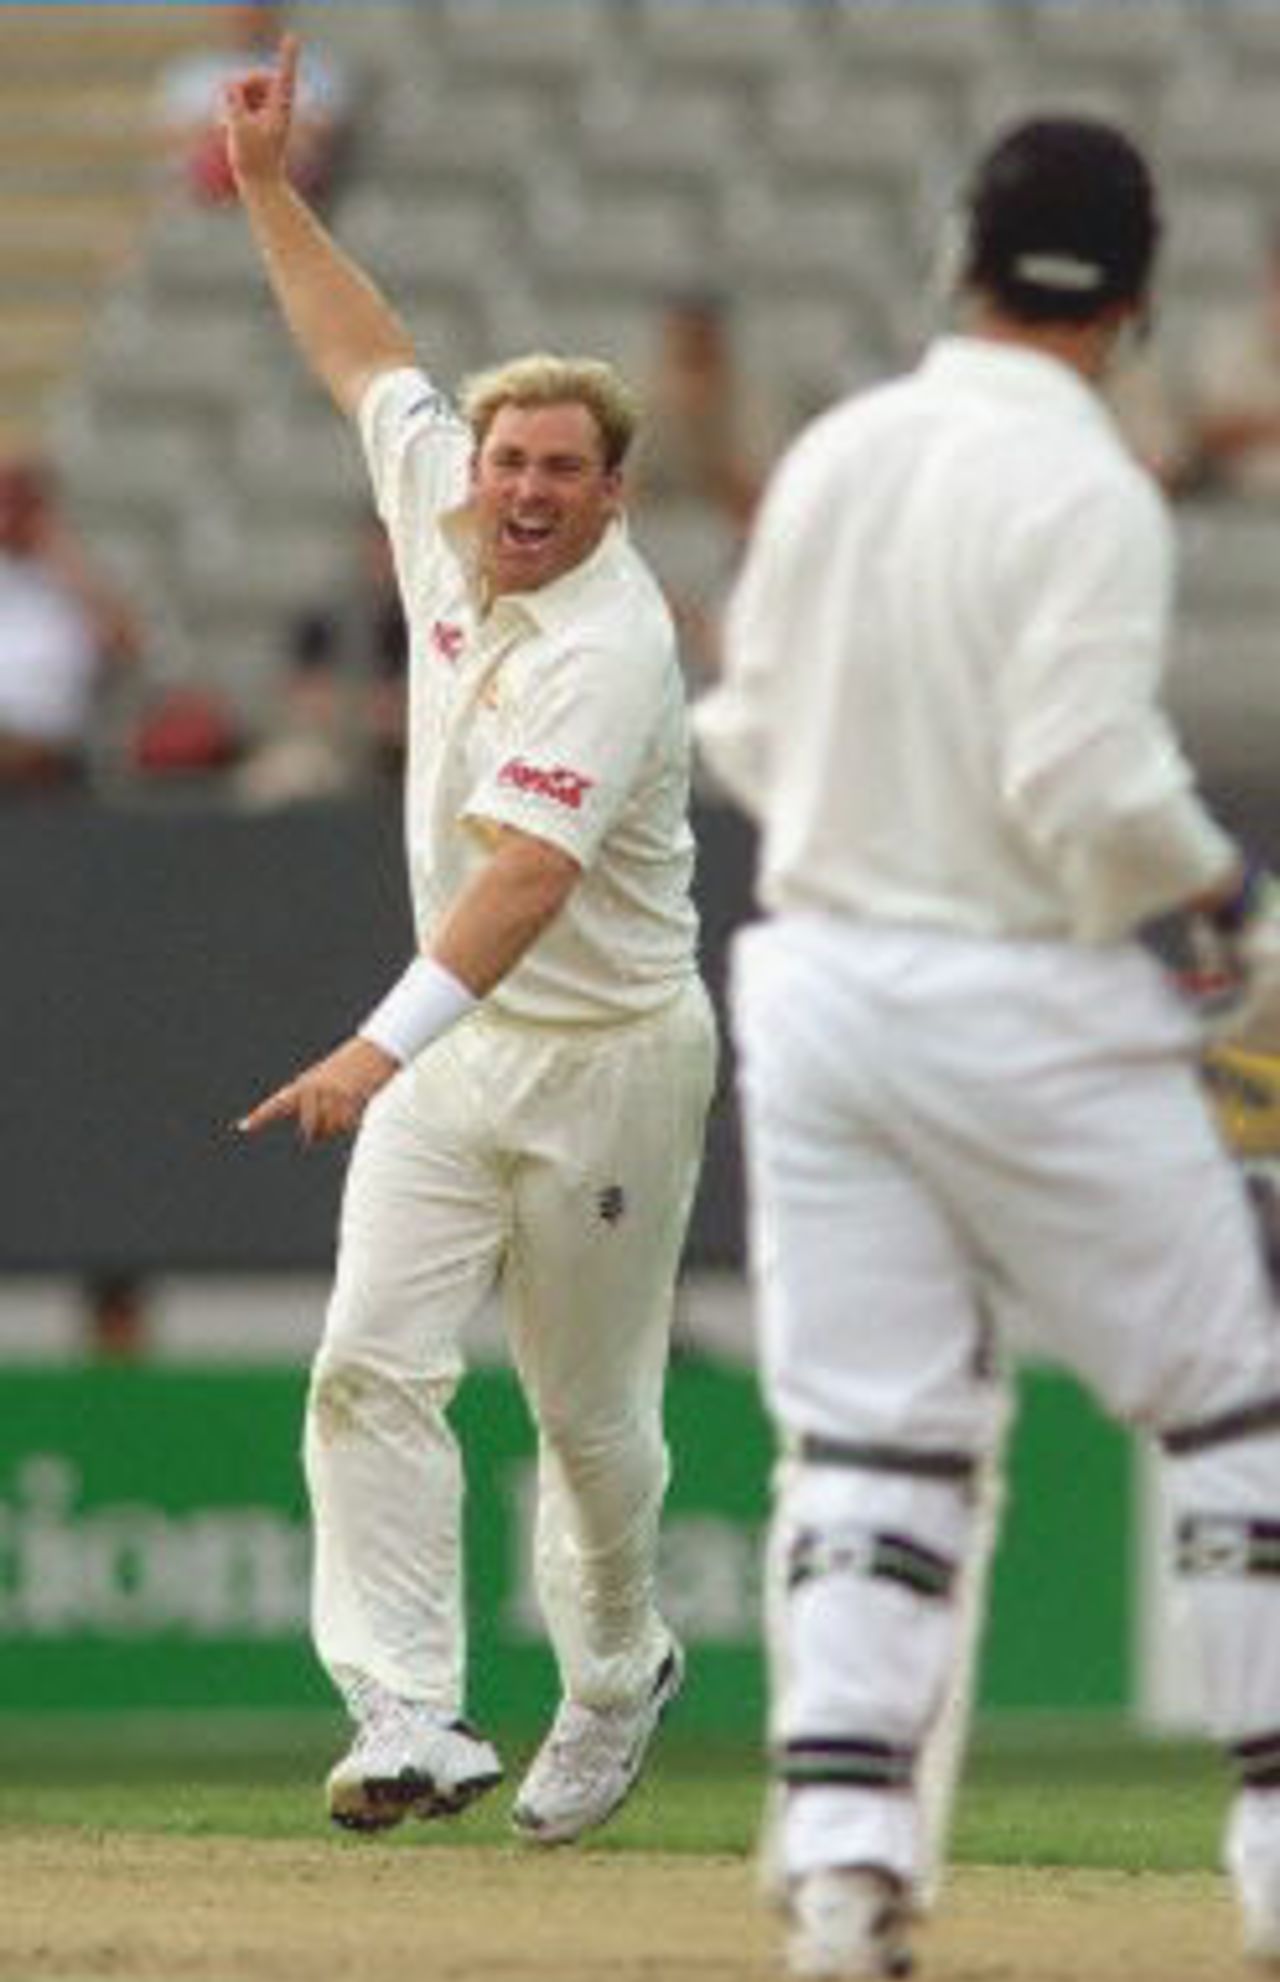 Australian spinner Shane Warne (L) celebrates dismissing New Zealand batsman Matthew Sinclair (R) on the first day of the first Test Match at Eden Park in Auckland 11 March 2000. Australia was dismissed for 214 in their first innings and in reply New Zealand is in trouble at 25-4 at stumps.